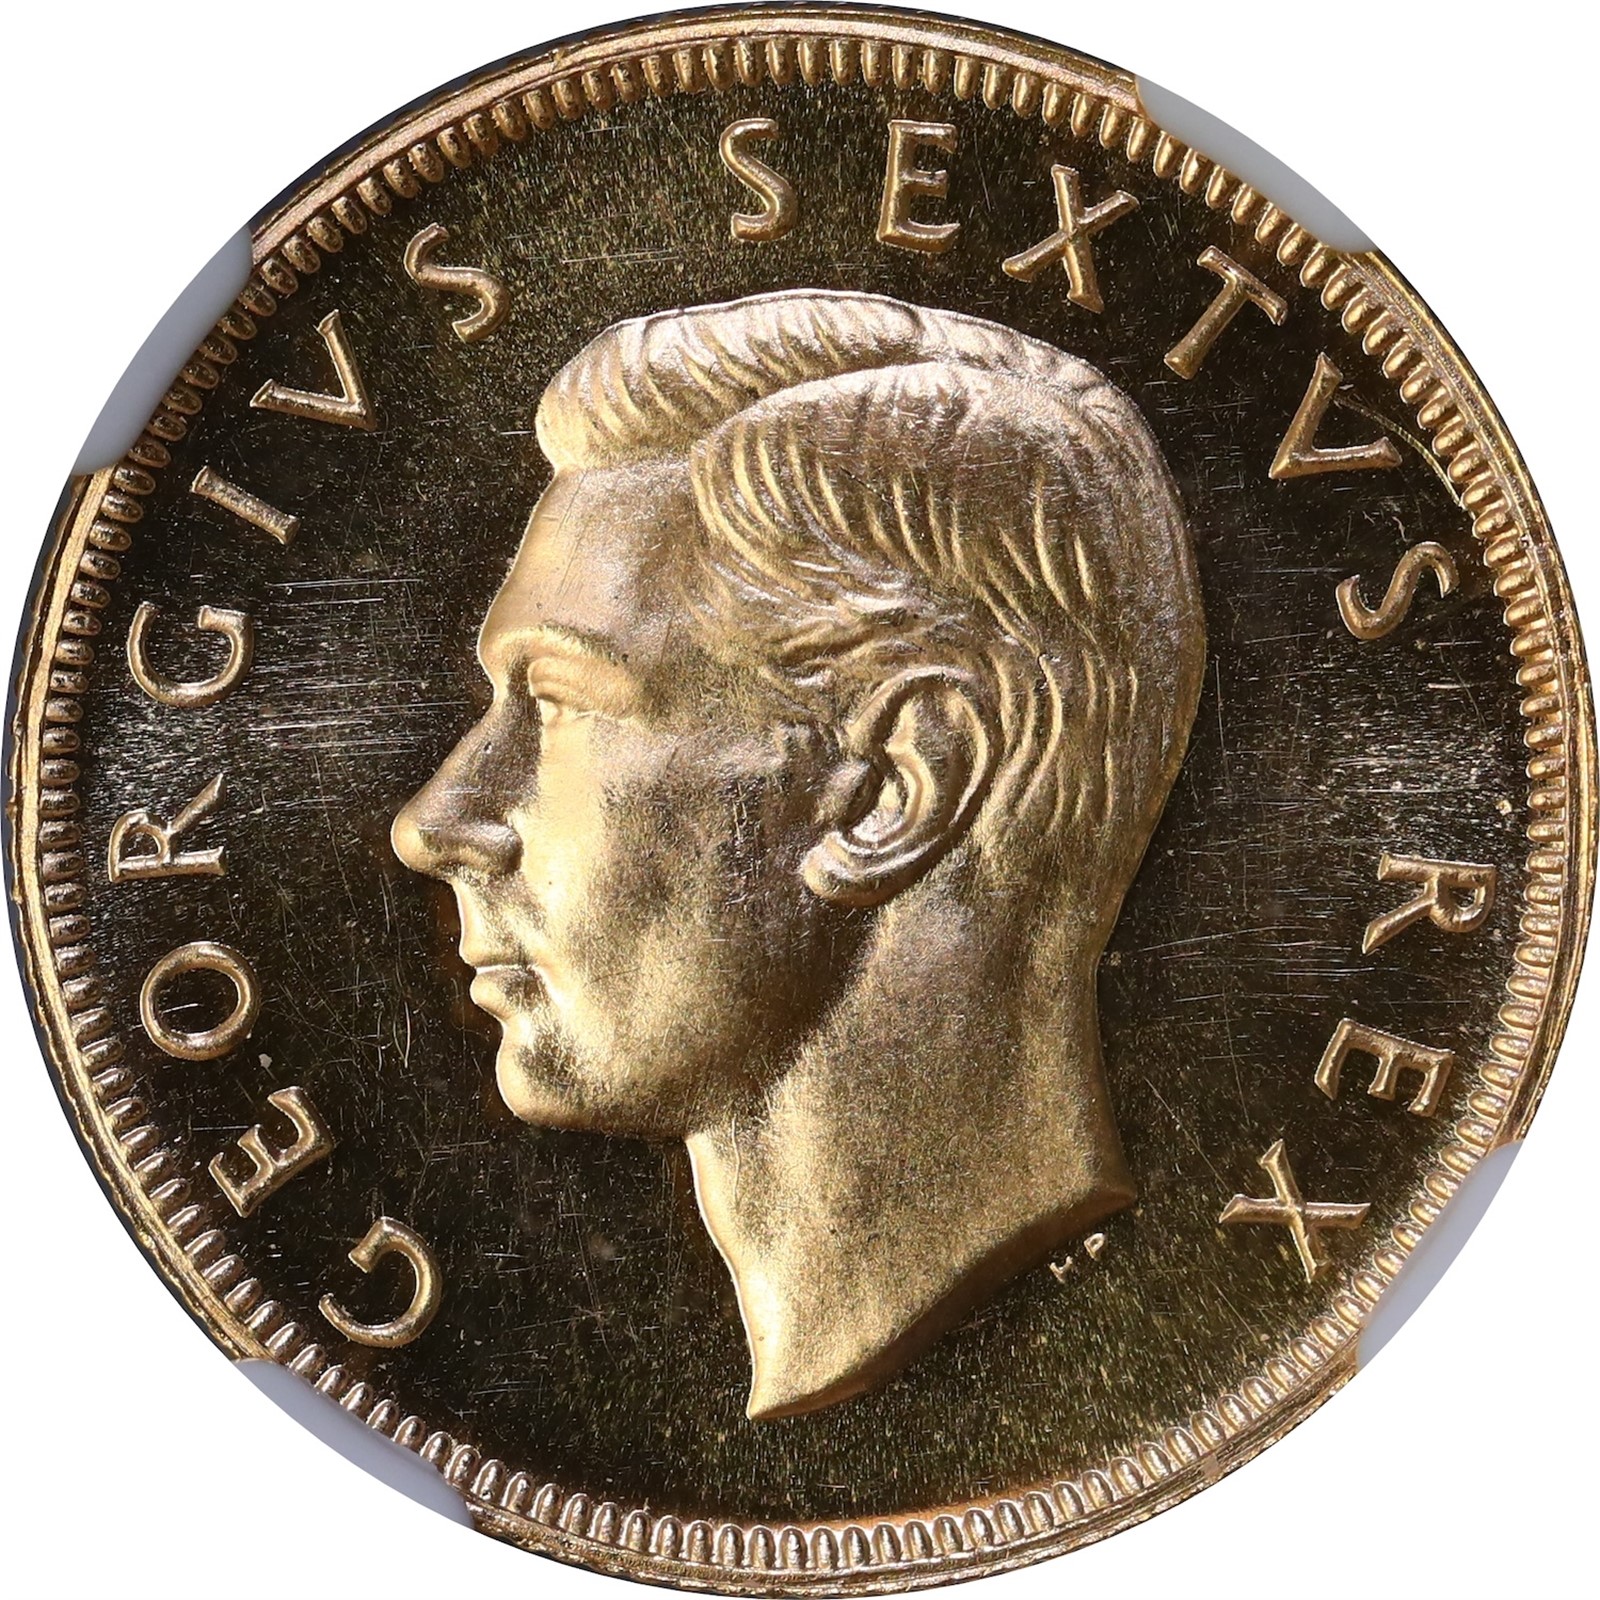 SOUTH AFRICA. George VI. Pound 1952 NGC PF63